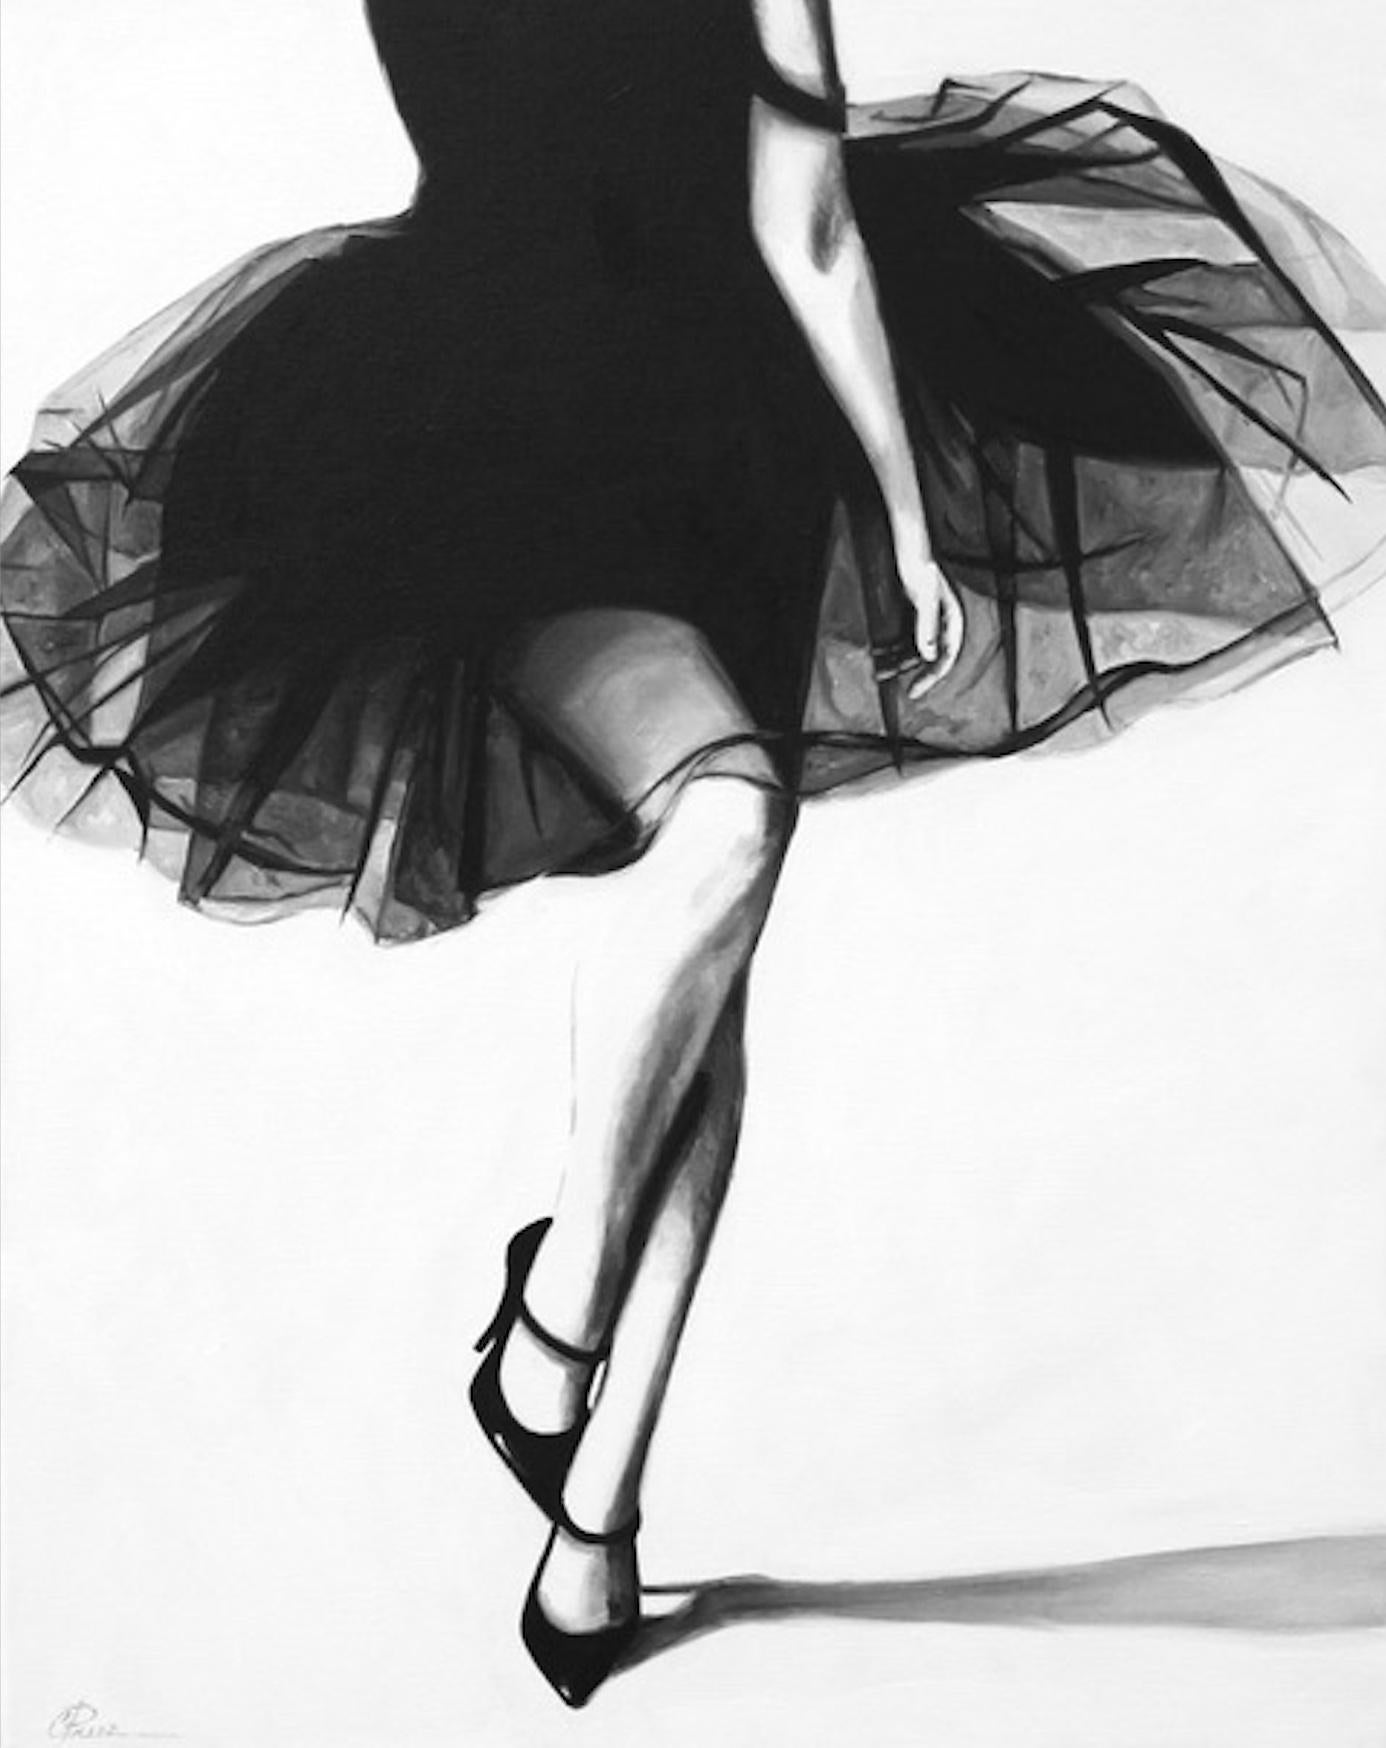 Cindy Press Figurative Painting - "RSVP" Figurative black and white oil painting of a woman's legs with heels